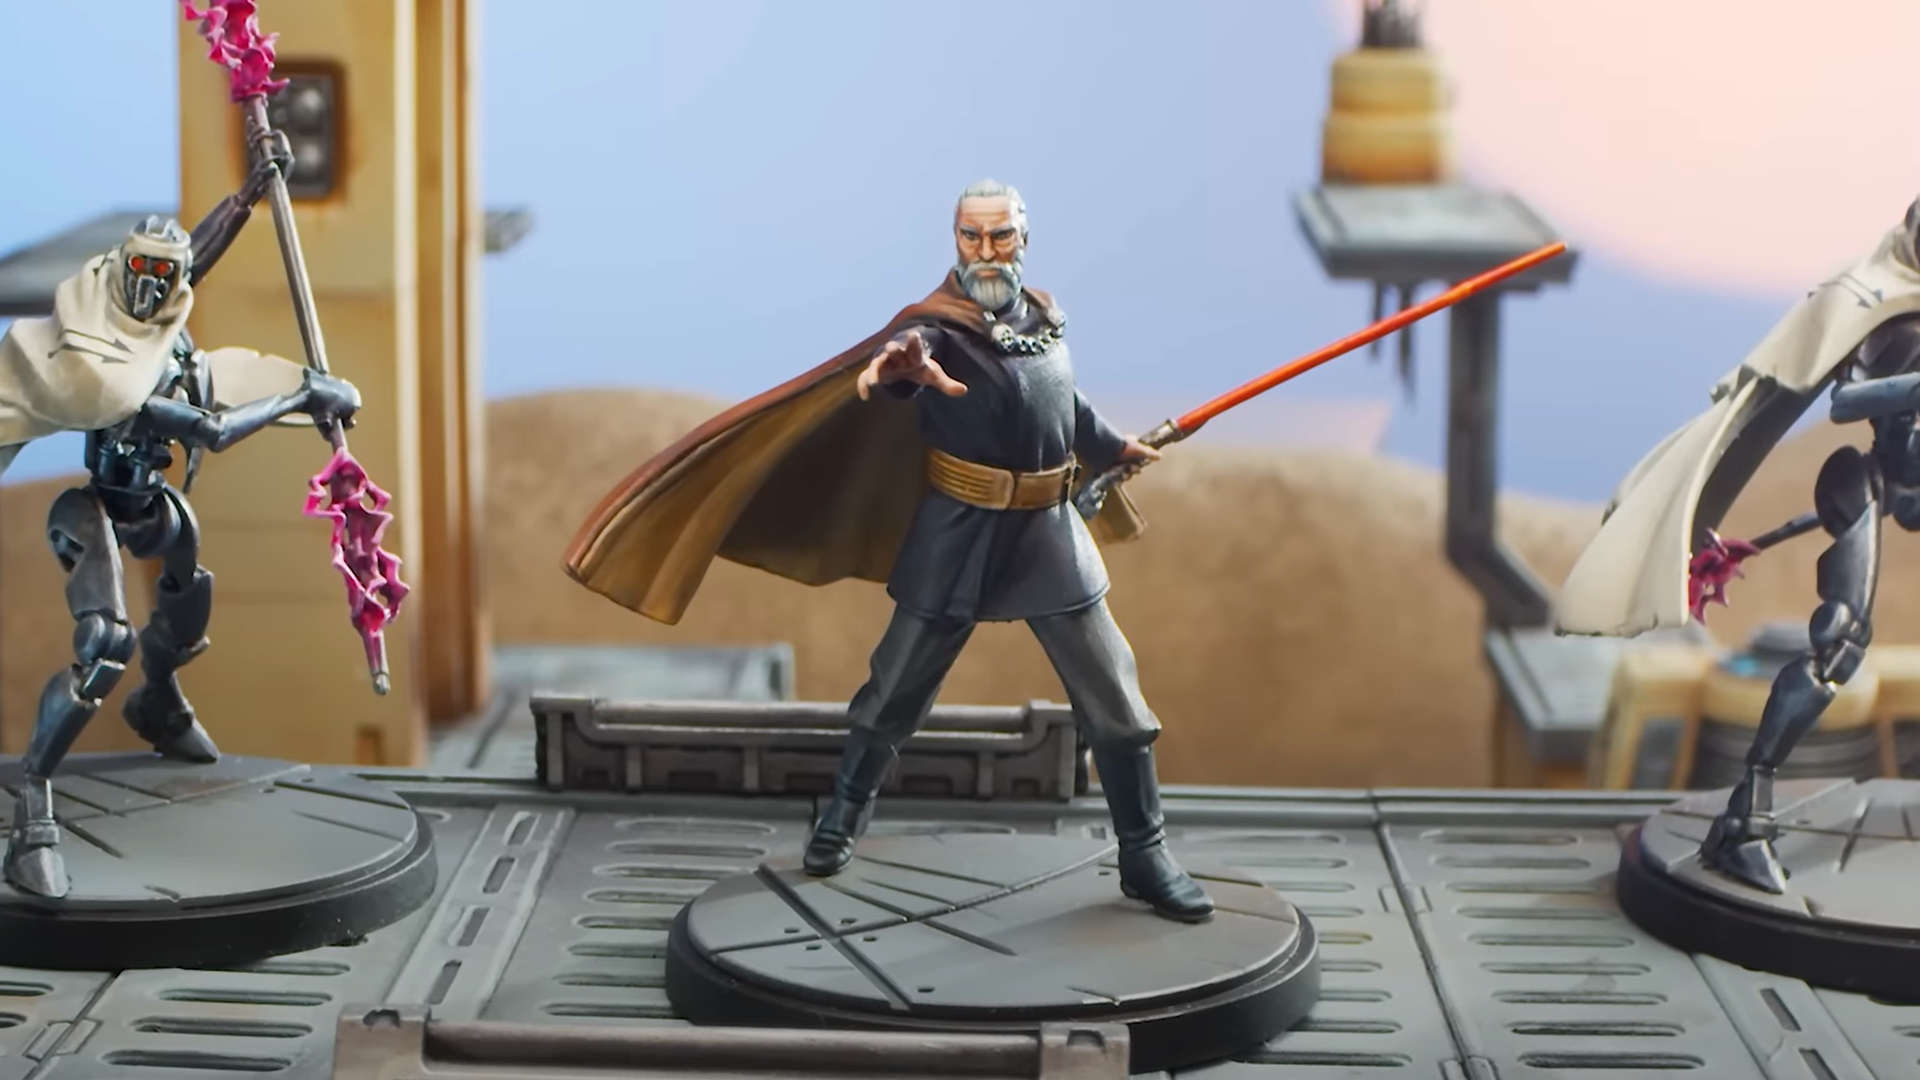 Star Wars Shatterpoint - models by Atomic Mass Games of Count Dooku and allies